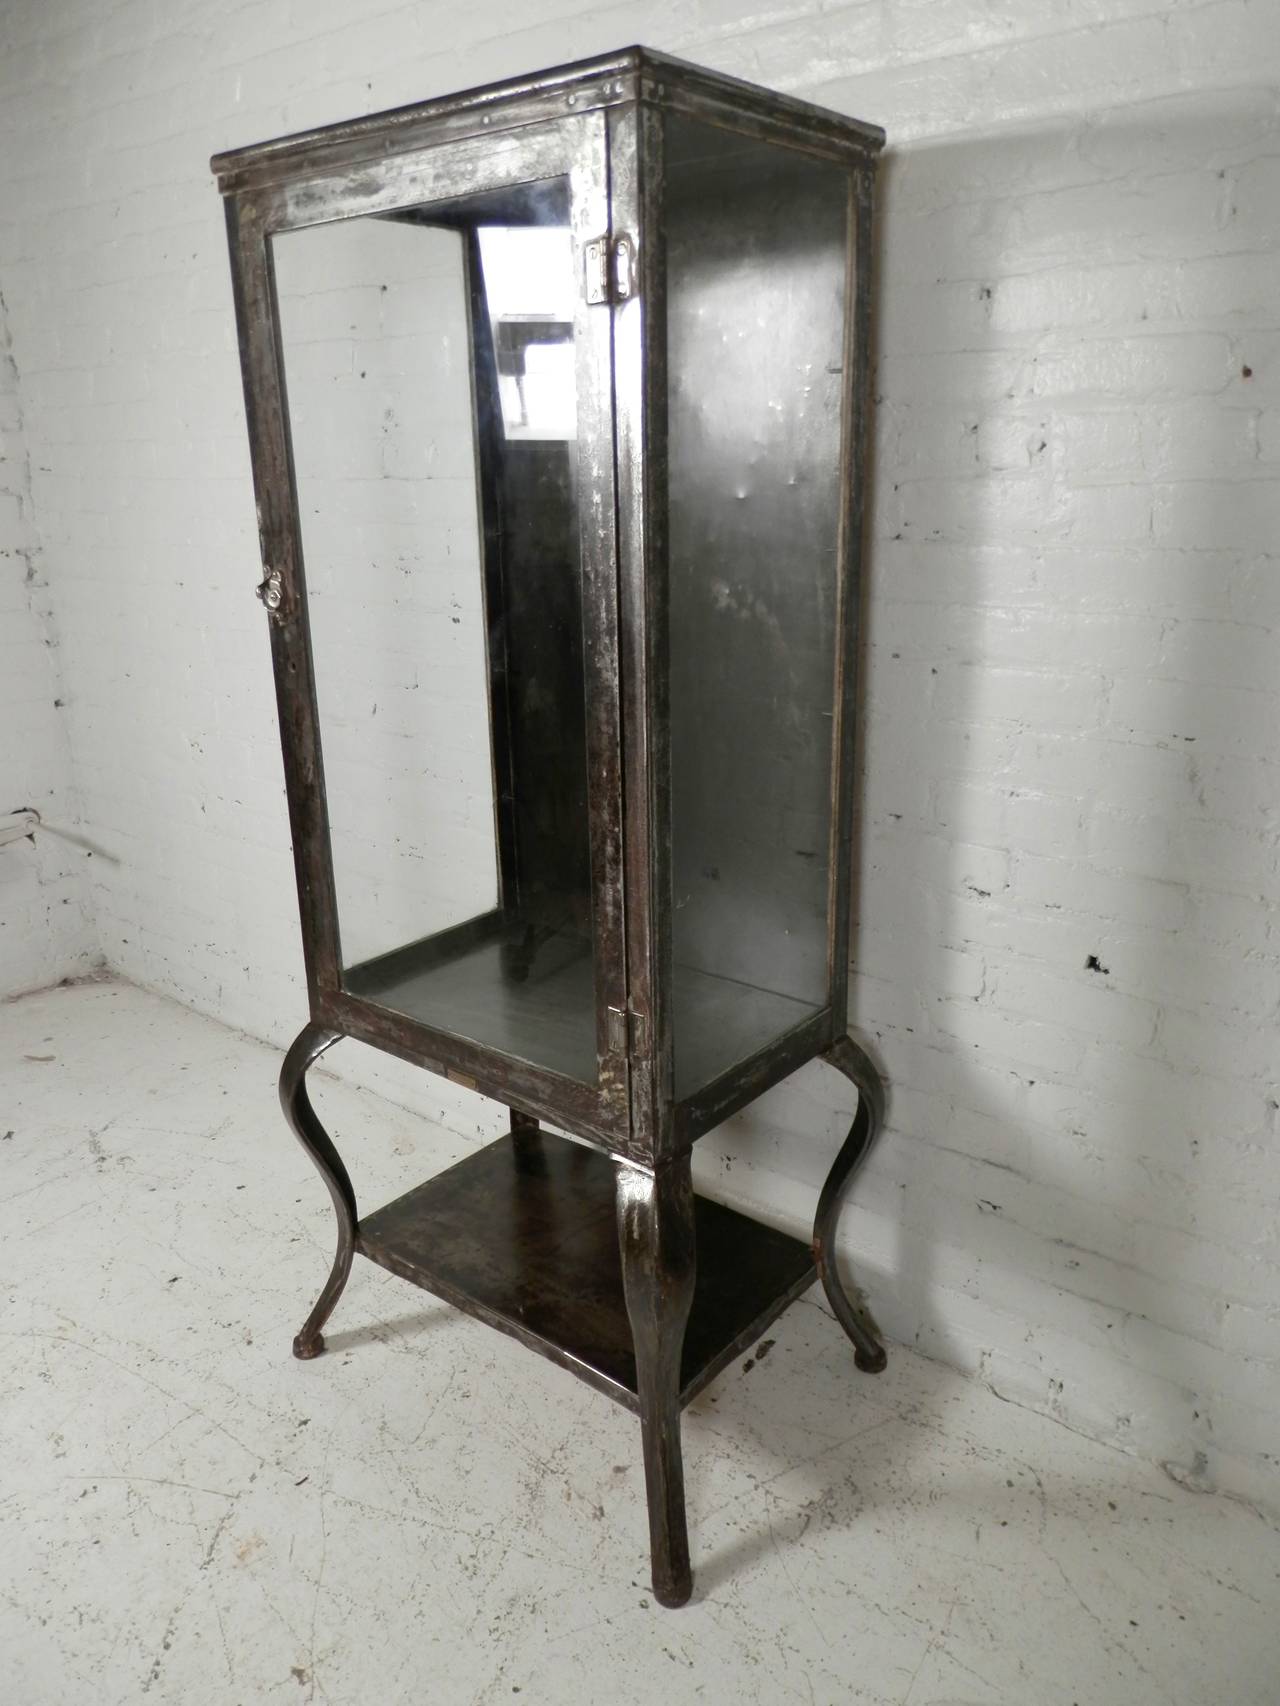 Industrial metal display cabinet with large visible cabinet. Completely restored in a stripped metal finish with sealant, to give an attractive factory look. Great for kitchen or bathroom storage.
Comes with three glass shelves not pictured, with